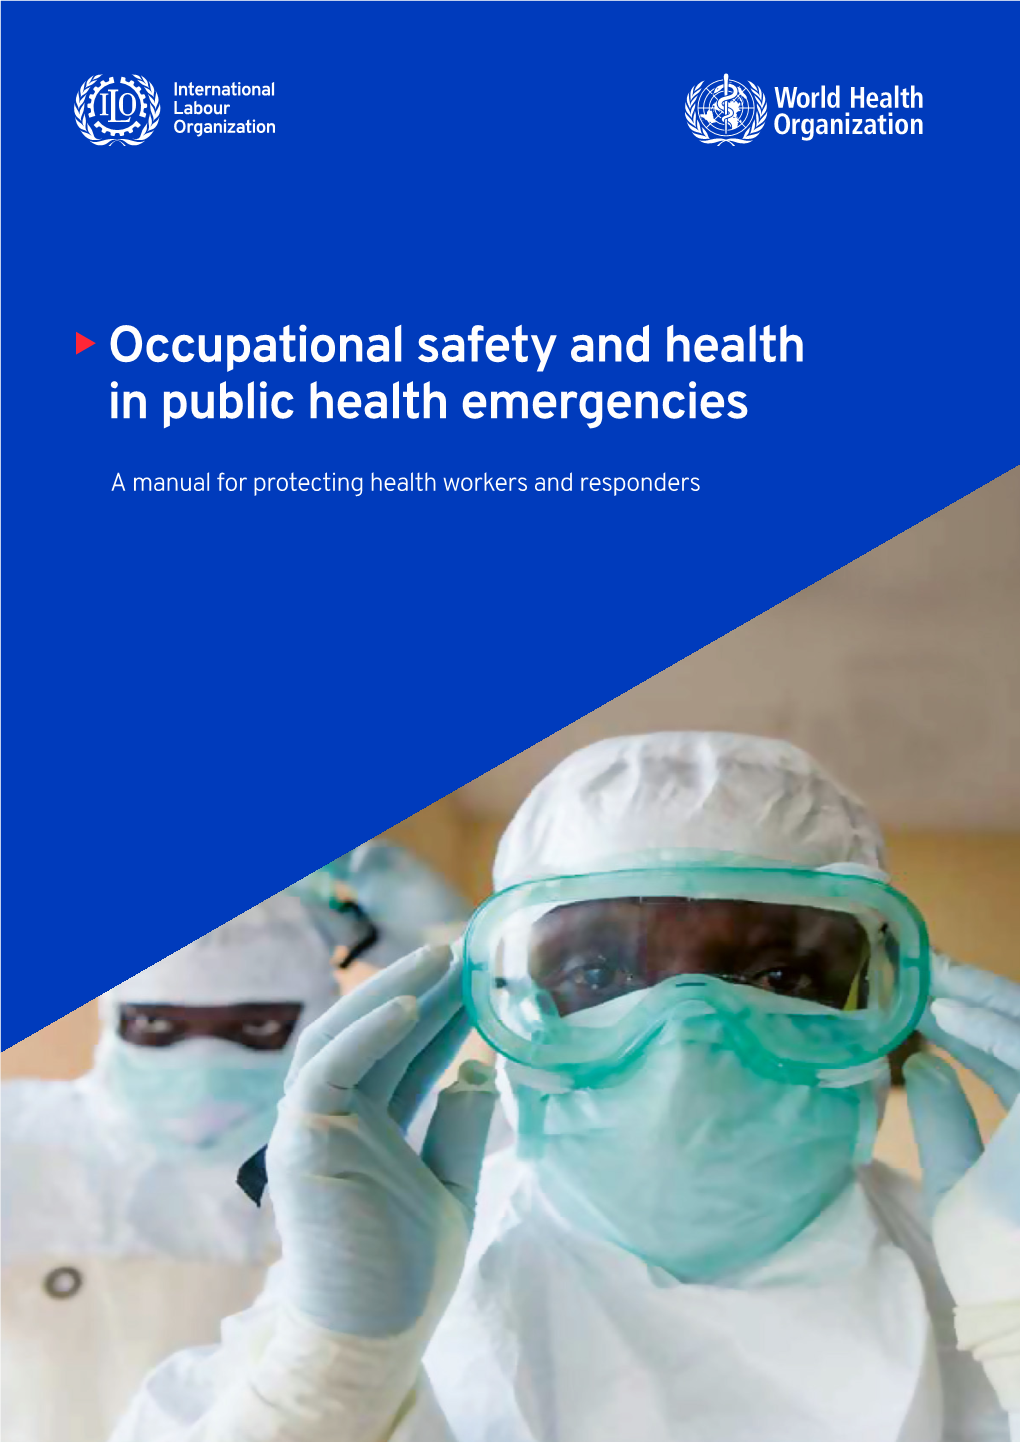 Occupational Safety and Health in Public Health Emergencies ILO | WHO Occupational Safety and Health in Public Health Emergencies